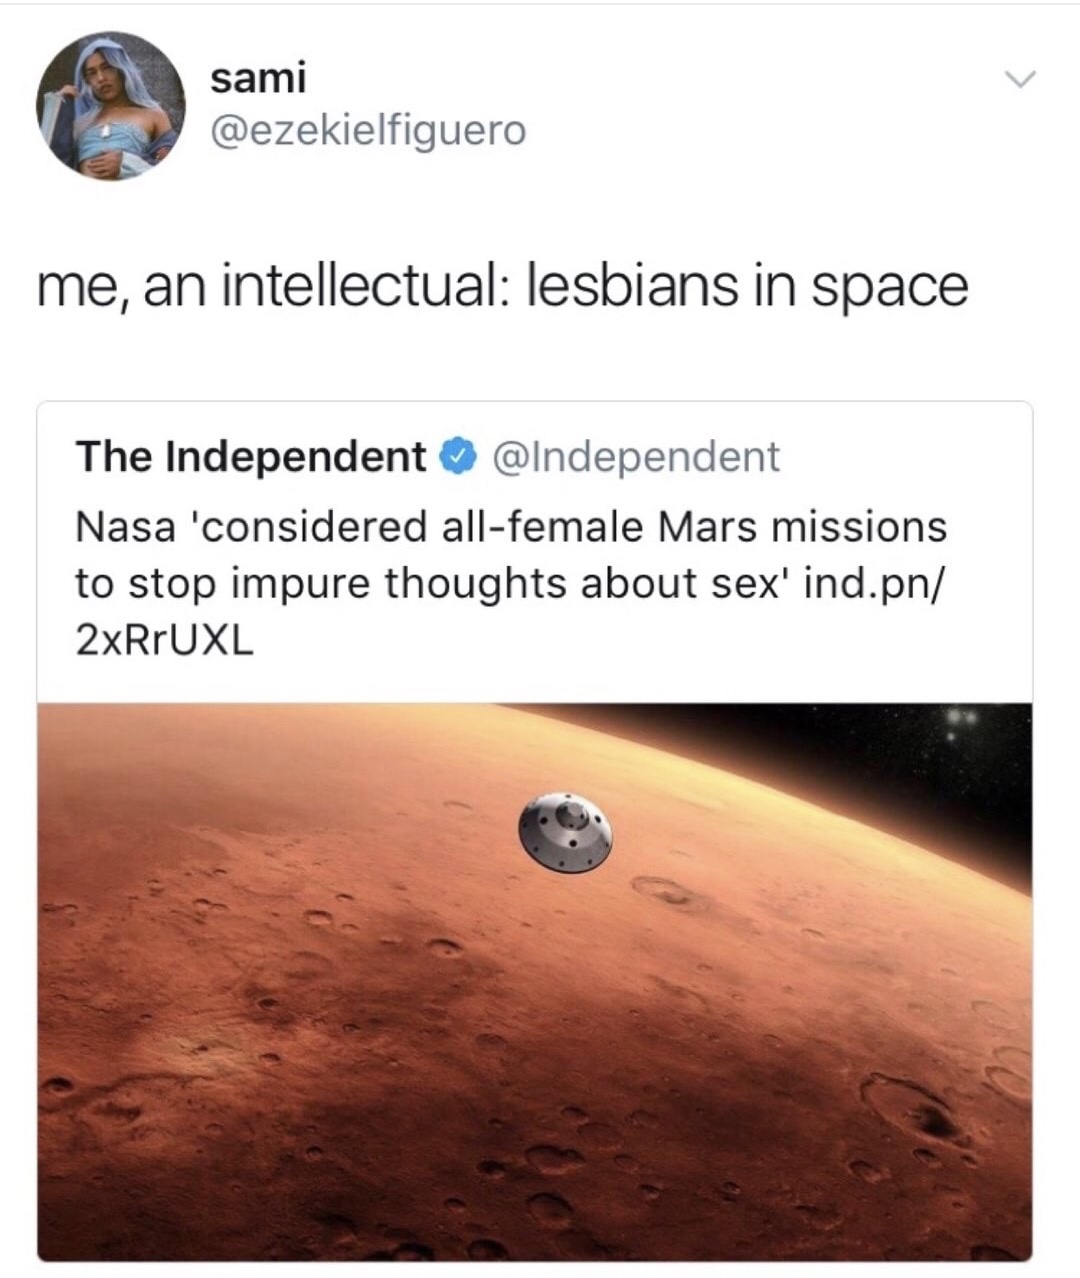 memes - memes belle epoque - sami me, an intellectual lesbians in space The Independent Nasa 'considered allfemale Mars missions to stop impure thoughts about sex' ind.pn 2xRrUXL